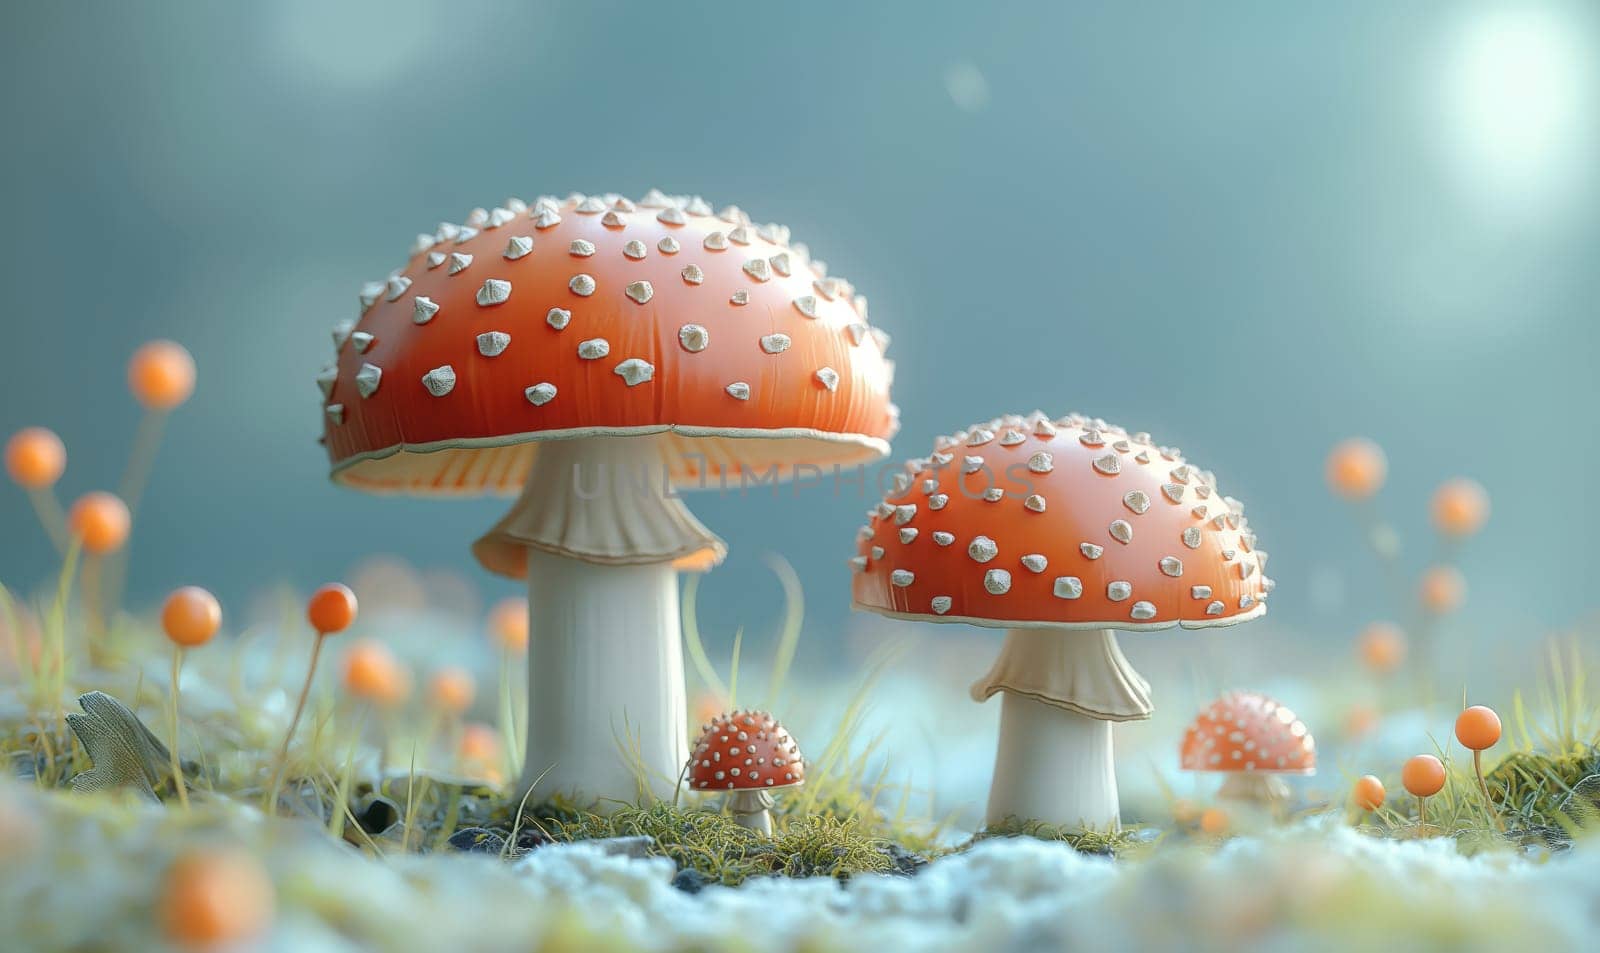 Illustration, fly agaric mushrooms in a clearing. Selective focus.